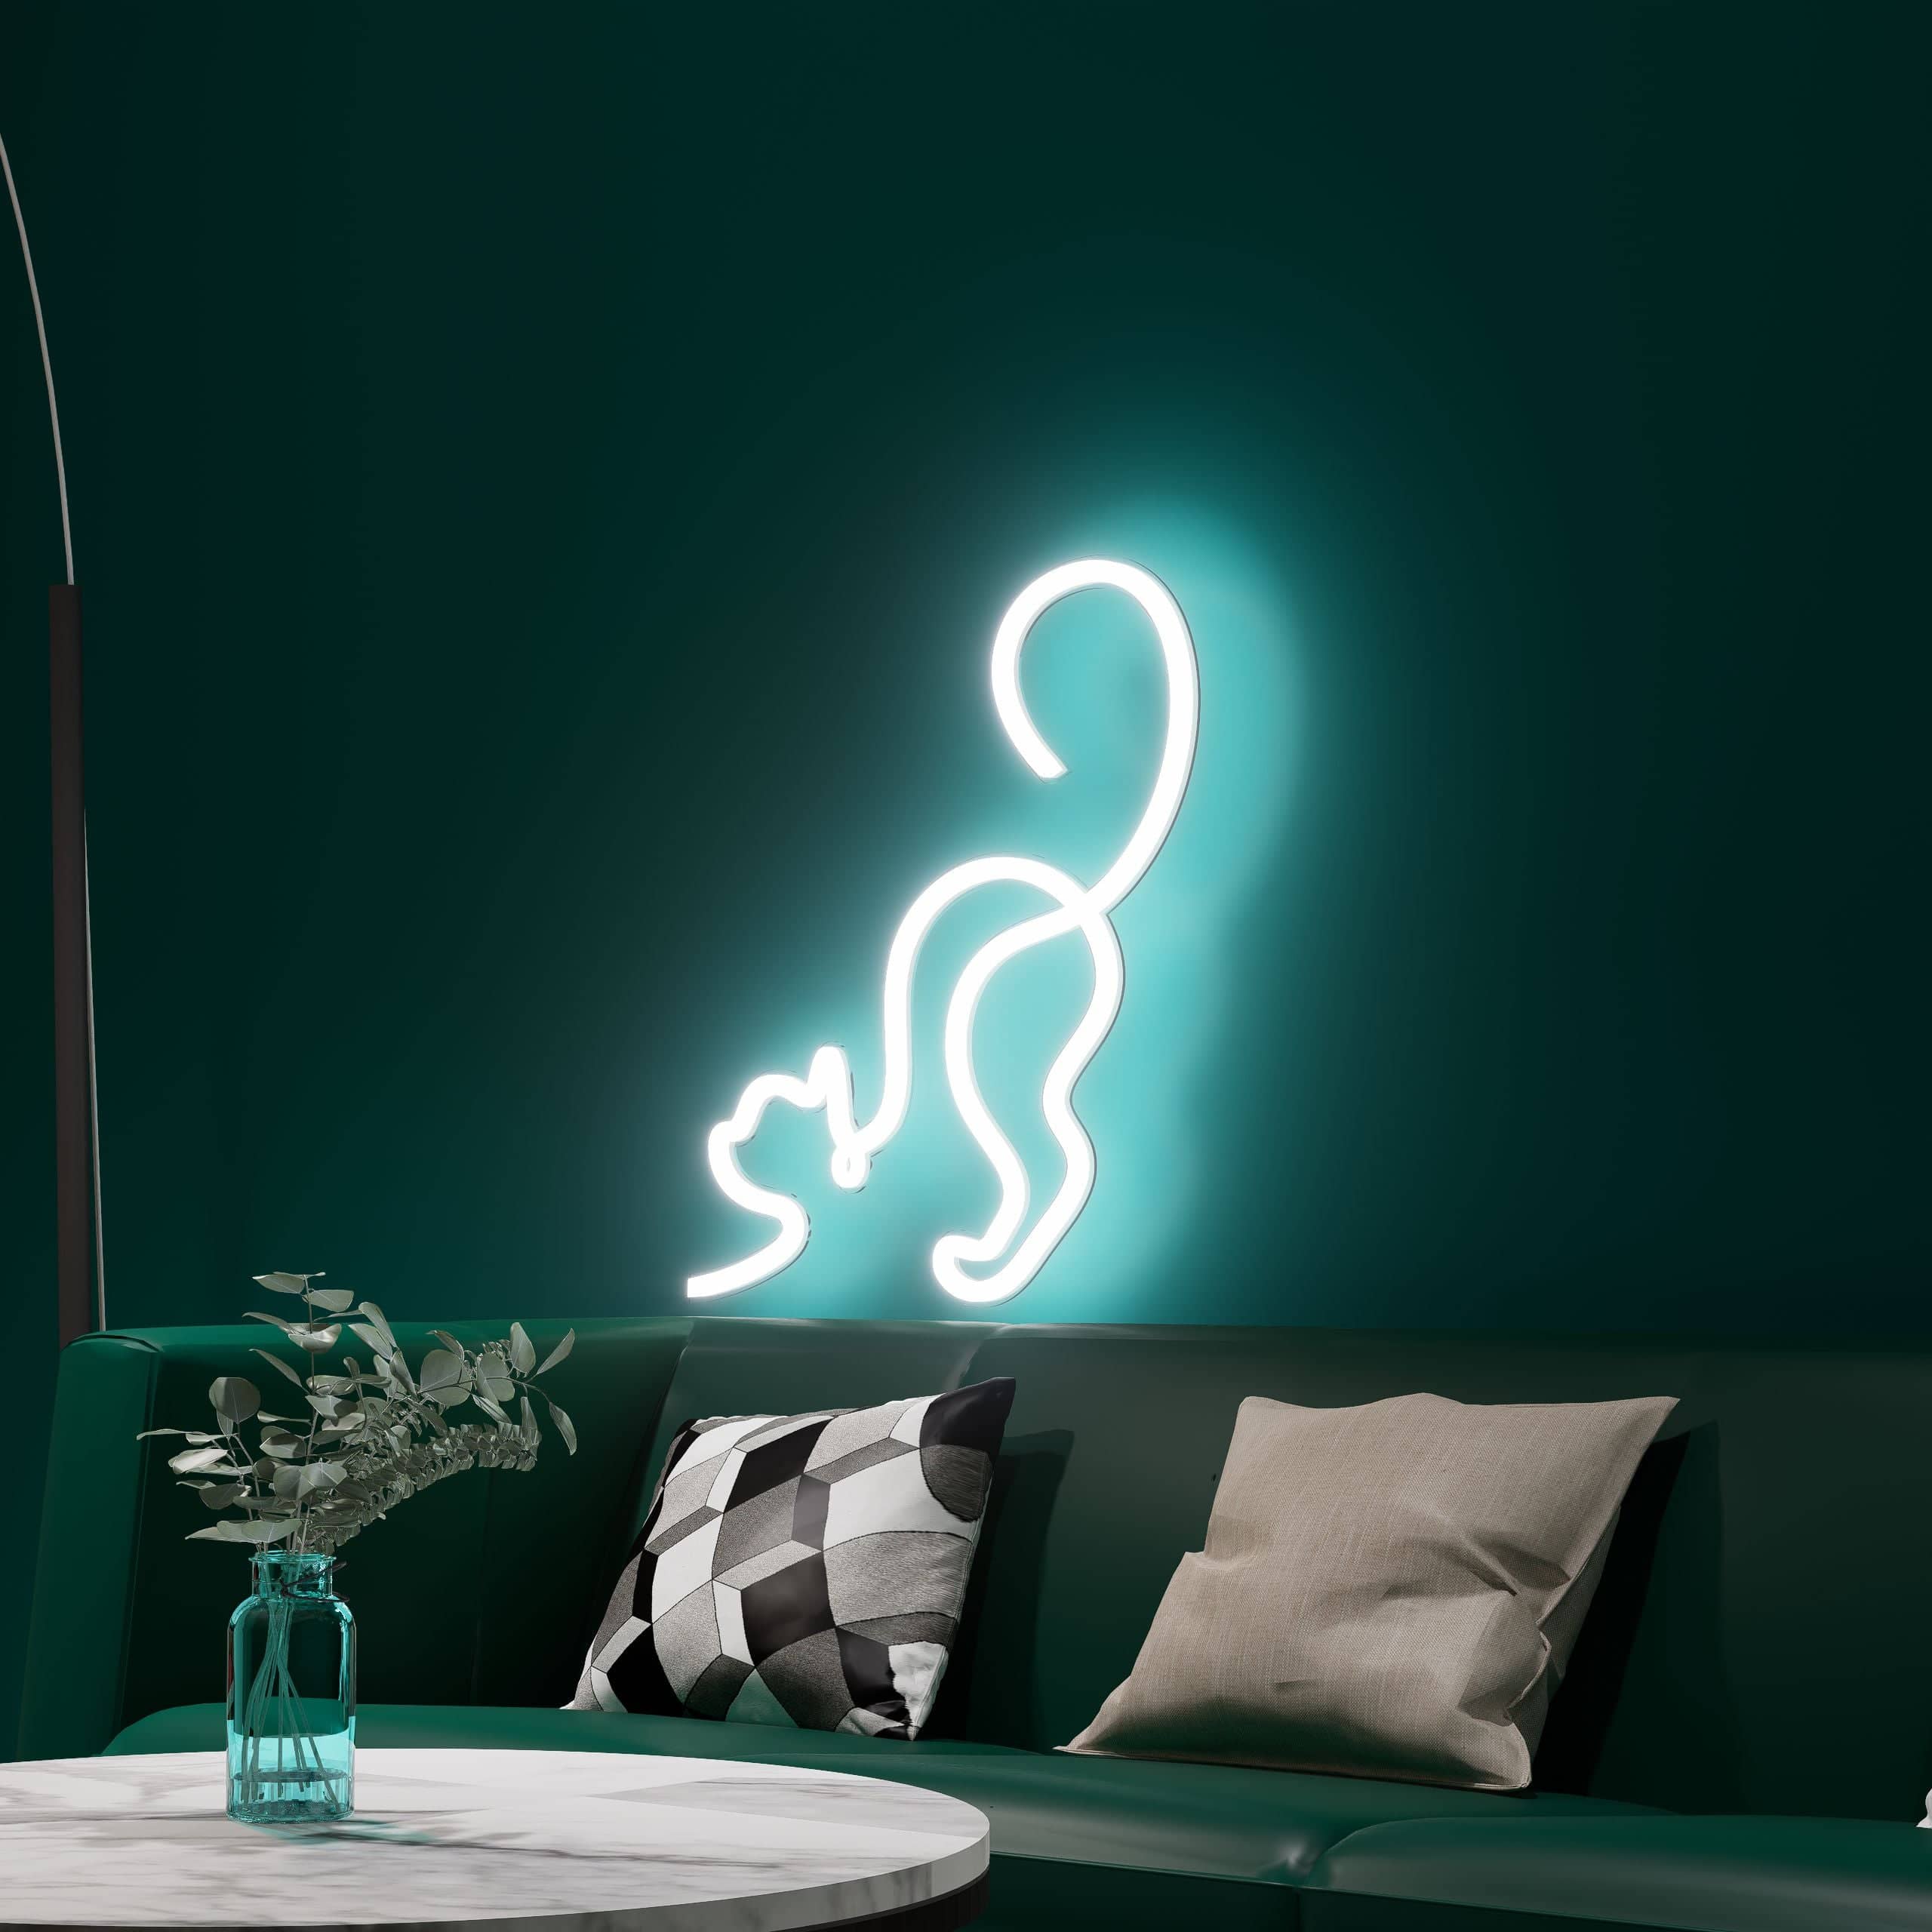 Bright and playful kids neon sign perfect for young children's bedrooms